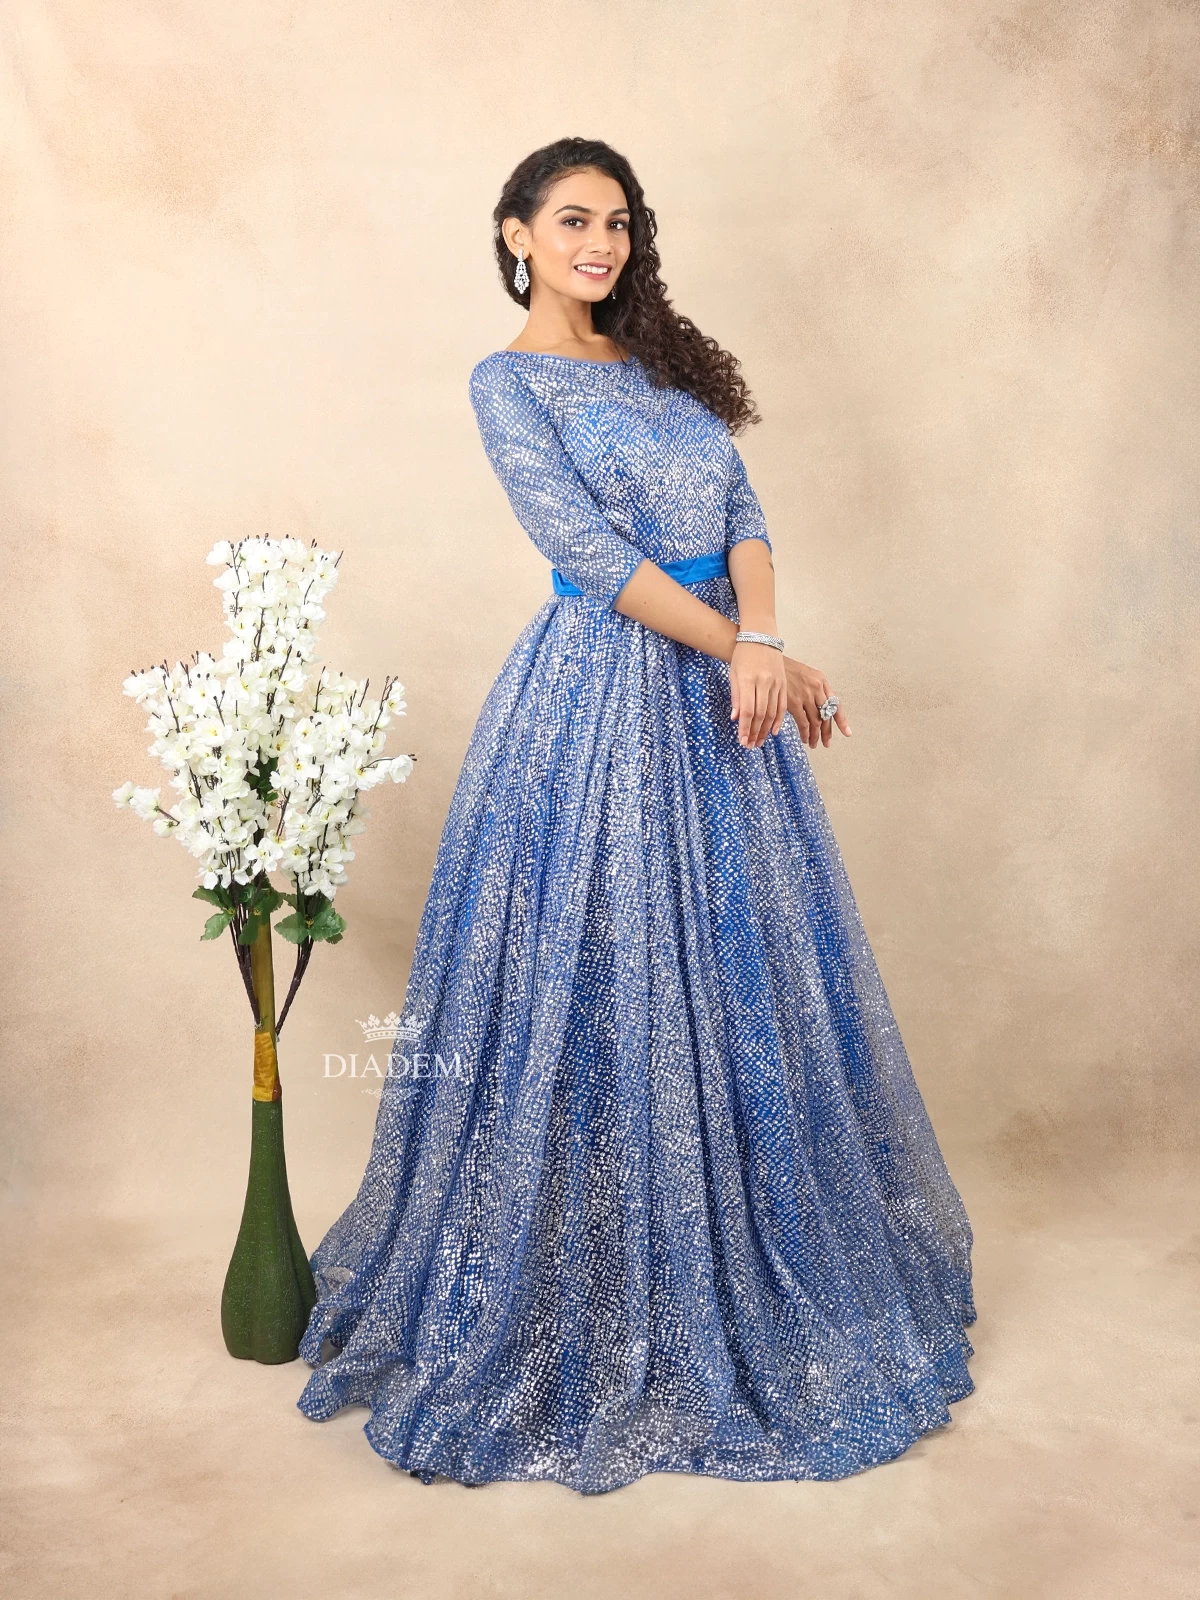 Royal Blue Ball Gown Adorned With Glitters